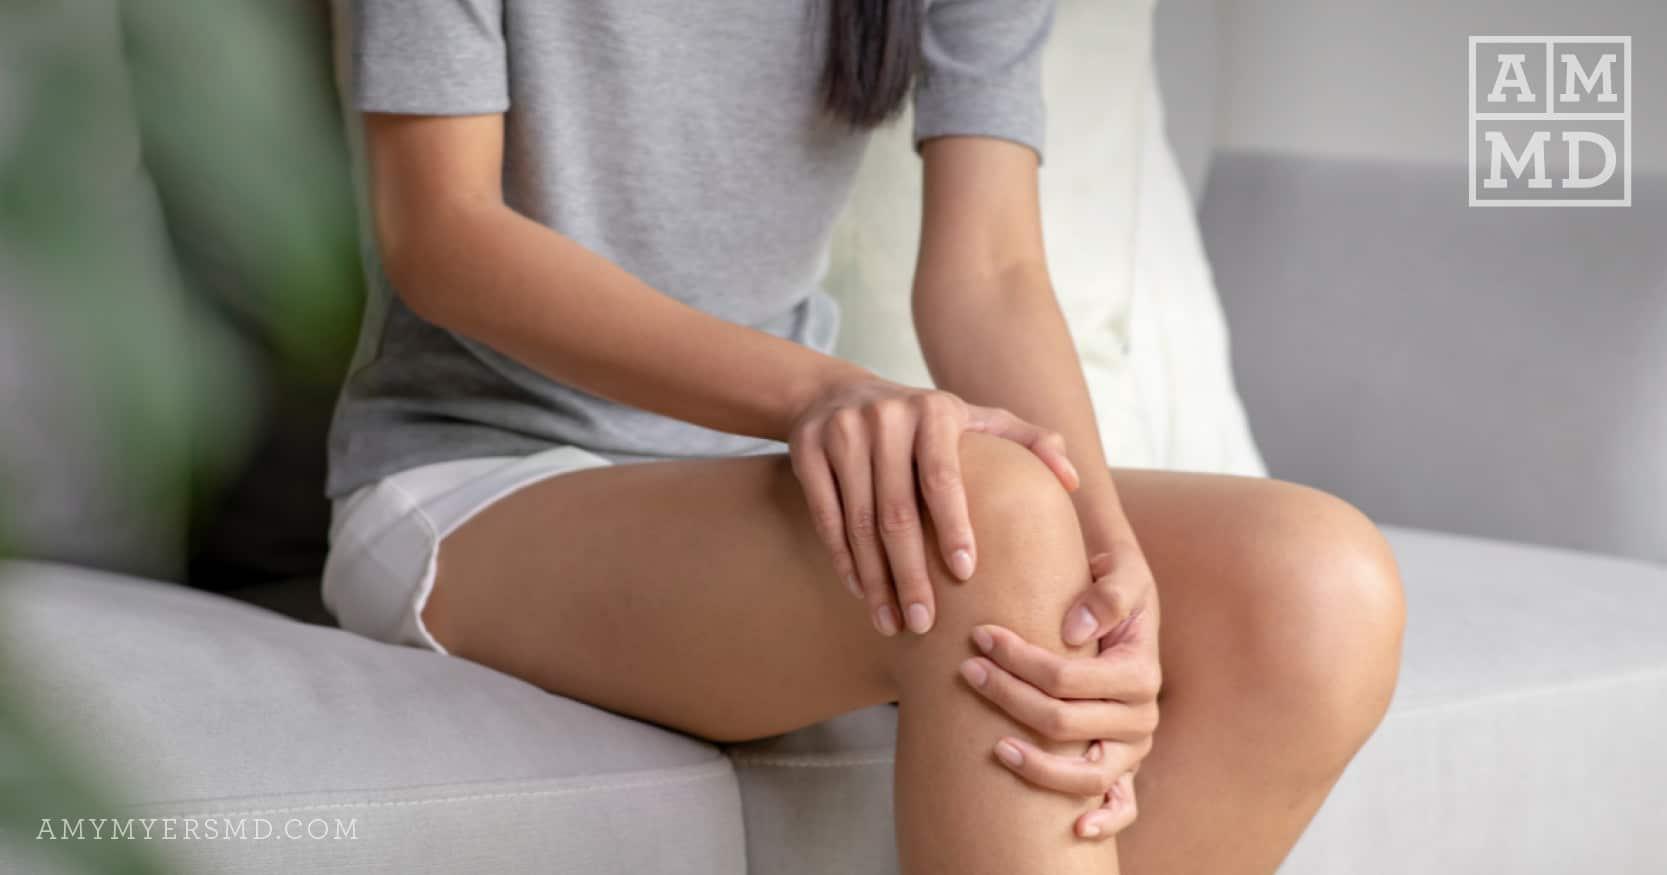 Woman holding knee - Top 5 Sources of Inflammation - Amy Myers MD®